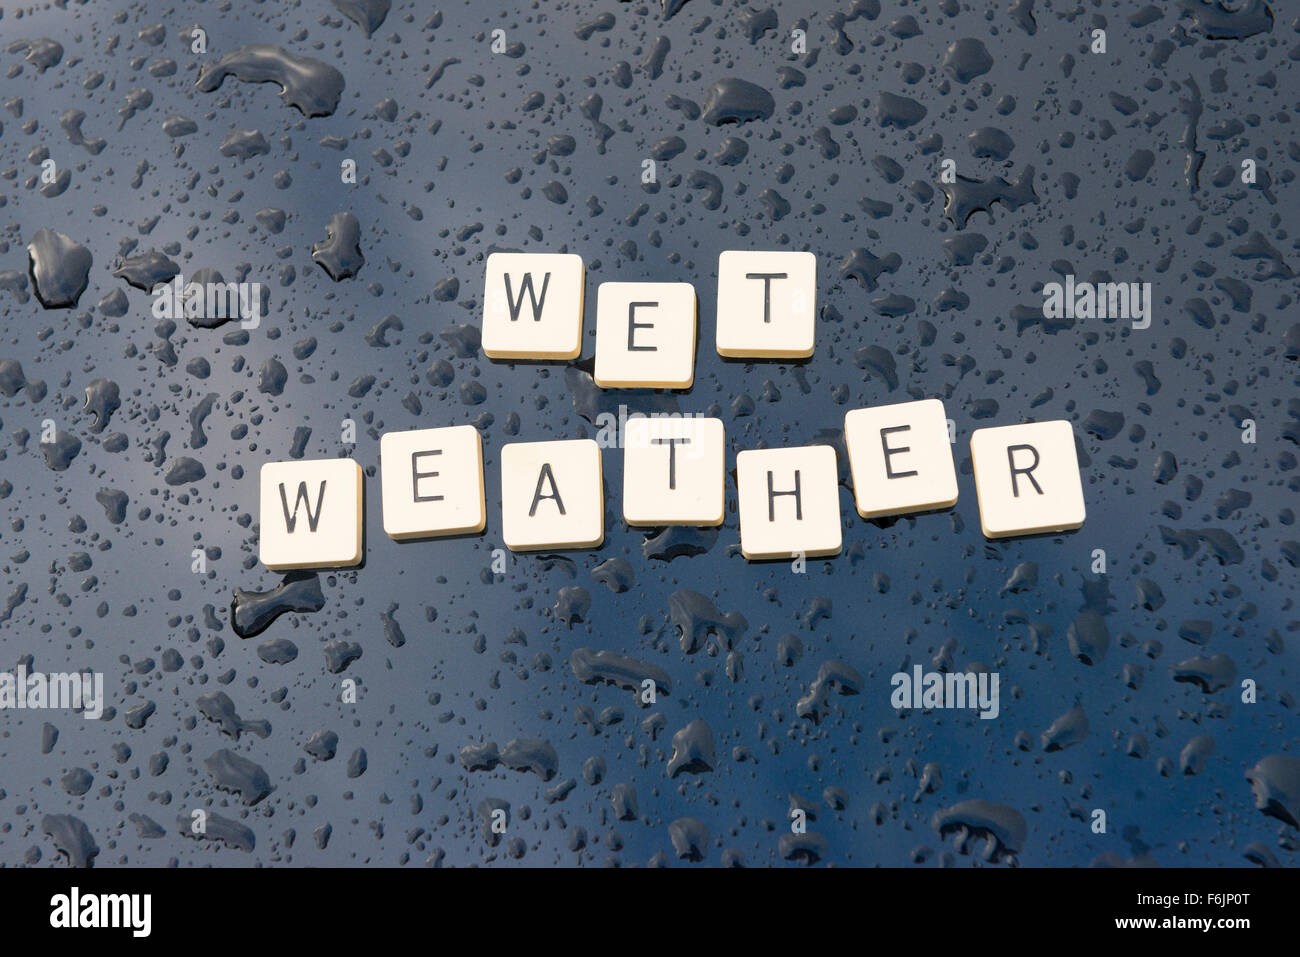 'Wet Weather' spelt out on a rain soaked car bonnet. Stock Photo